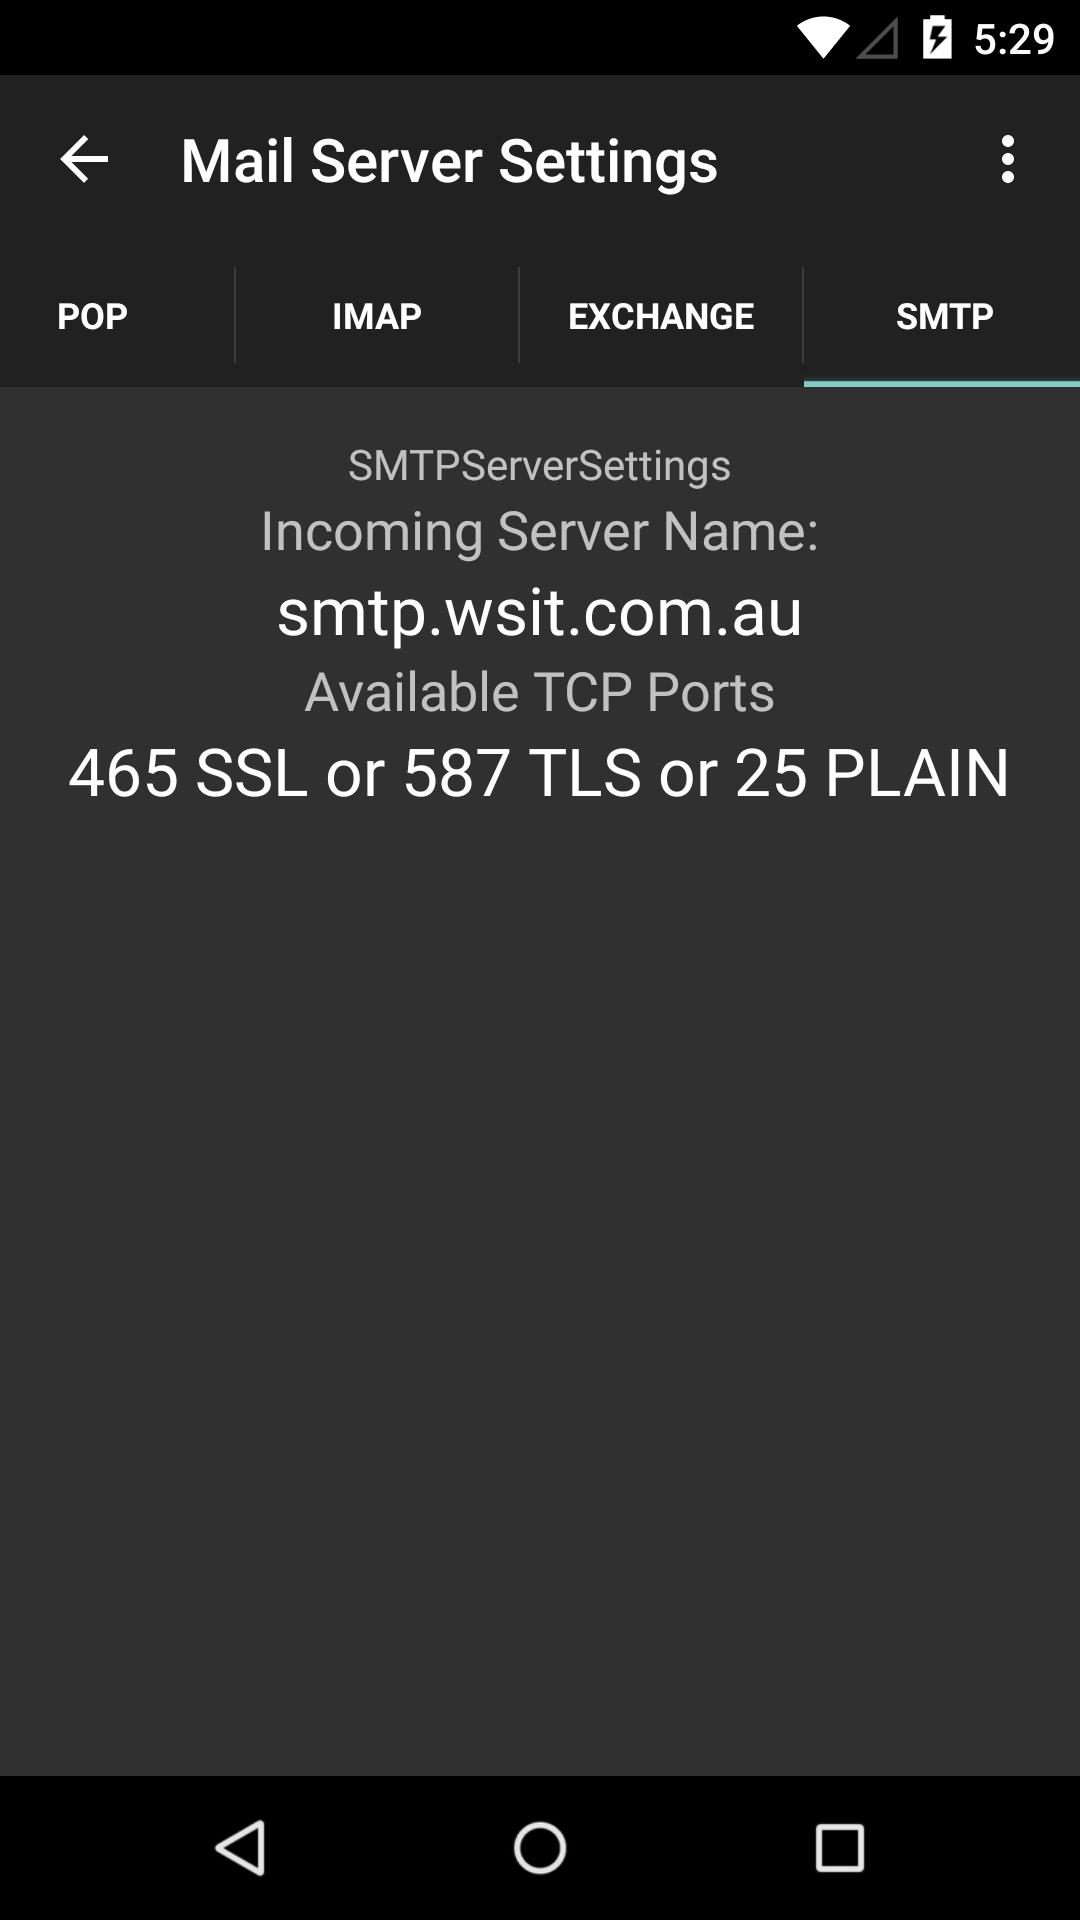 Mail Server Settings Finder for Android - APK Download